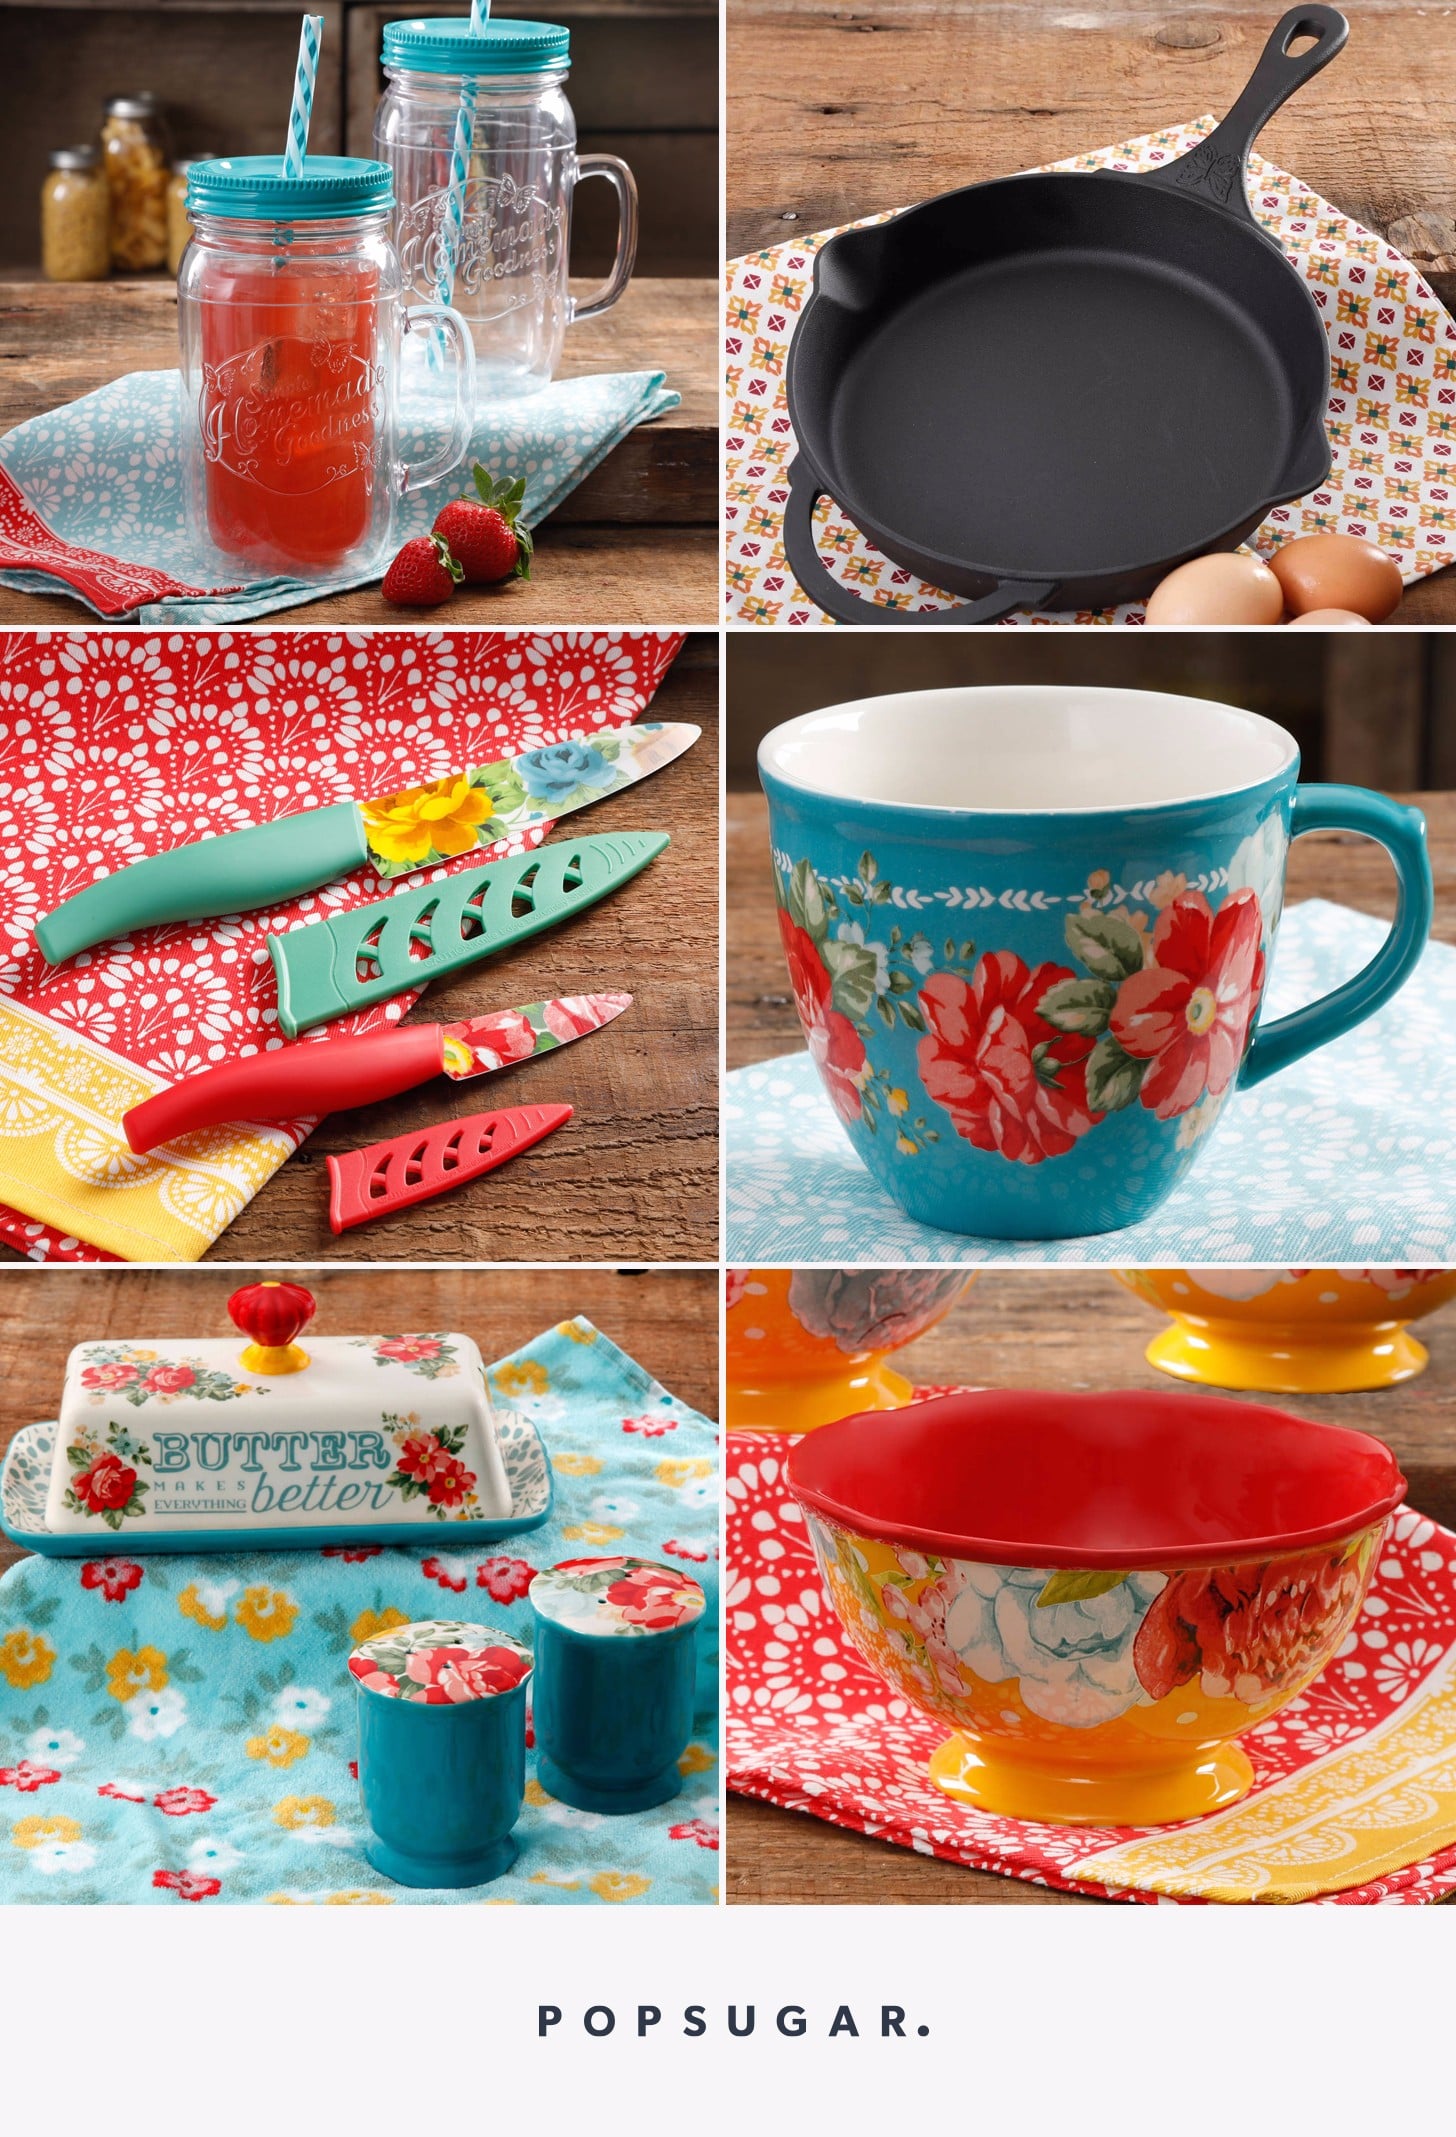 The Pioneer Woman Rustic Floral Silicone, 25-Piece Gadget Set, Teal